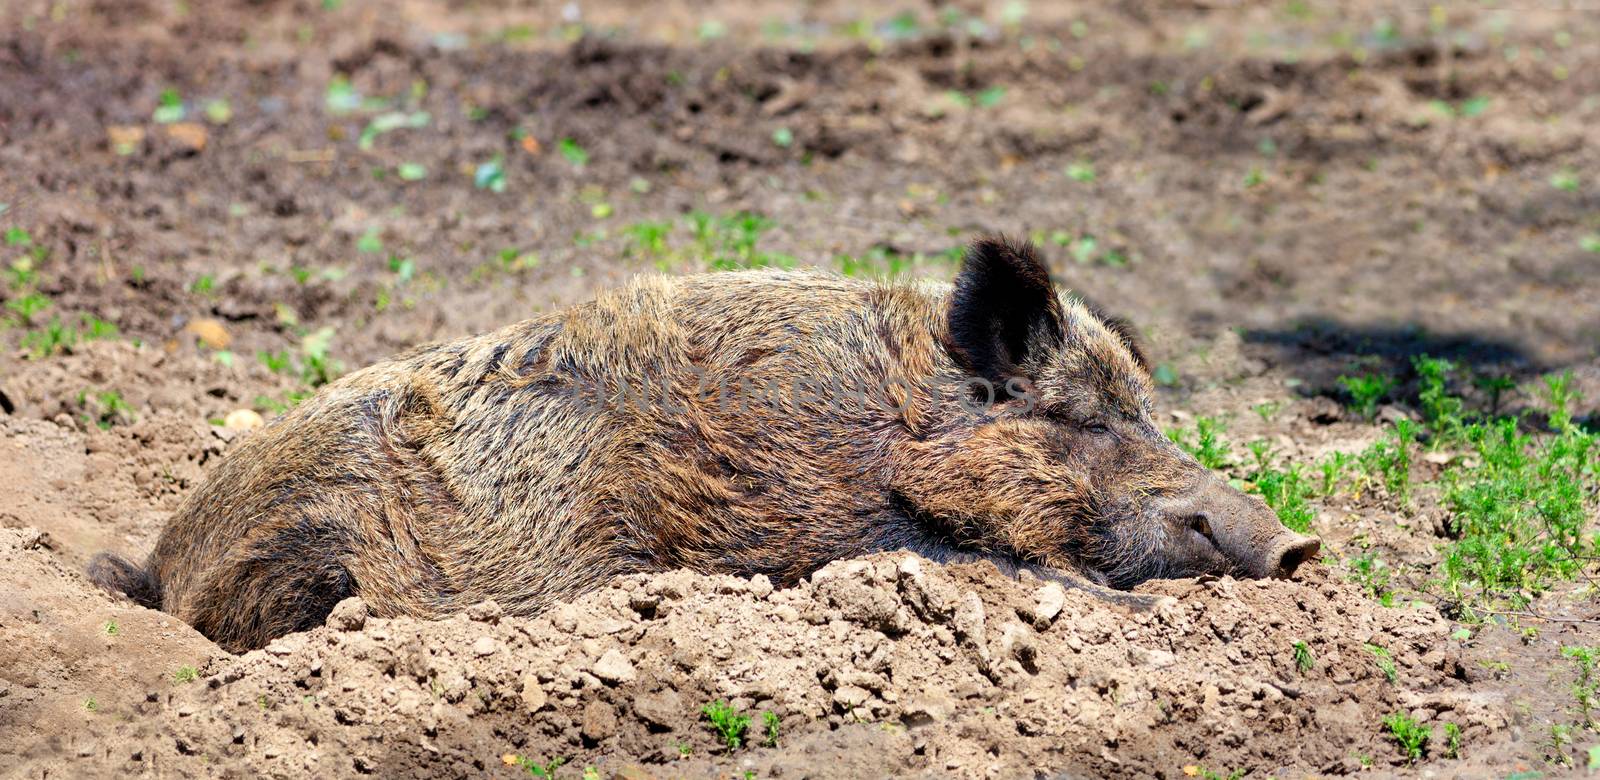 A large Eurasian boar sleeps peacefully and rests in the mud and takes warm sun baths.